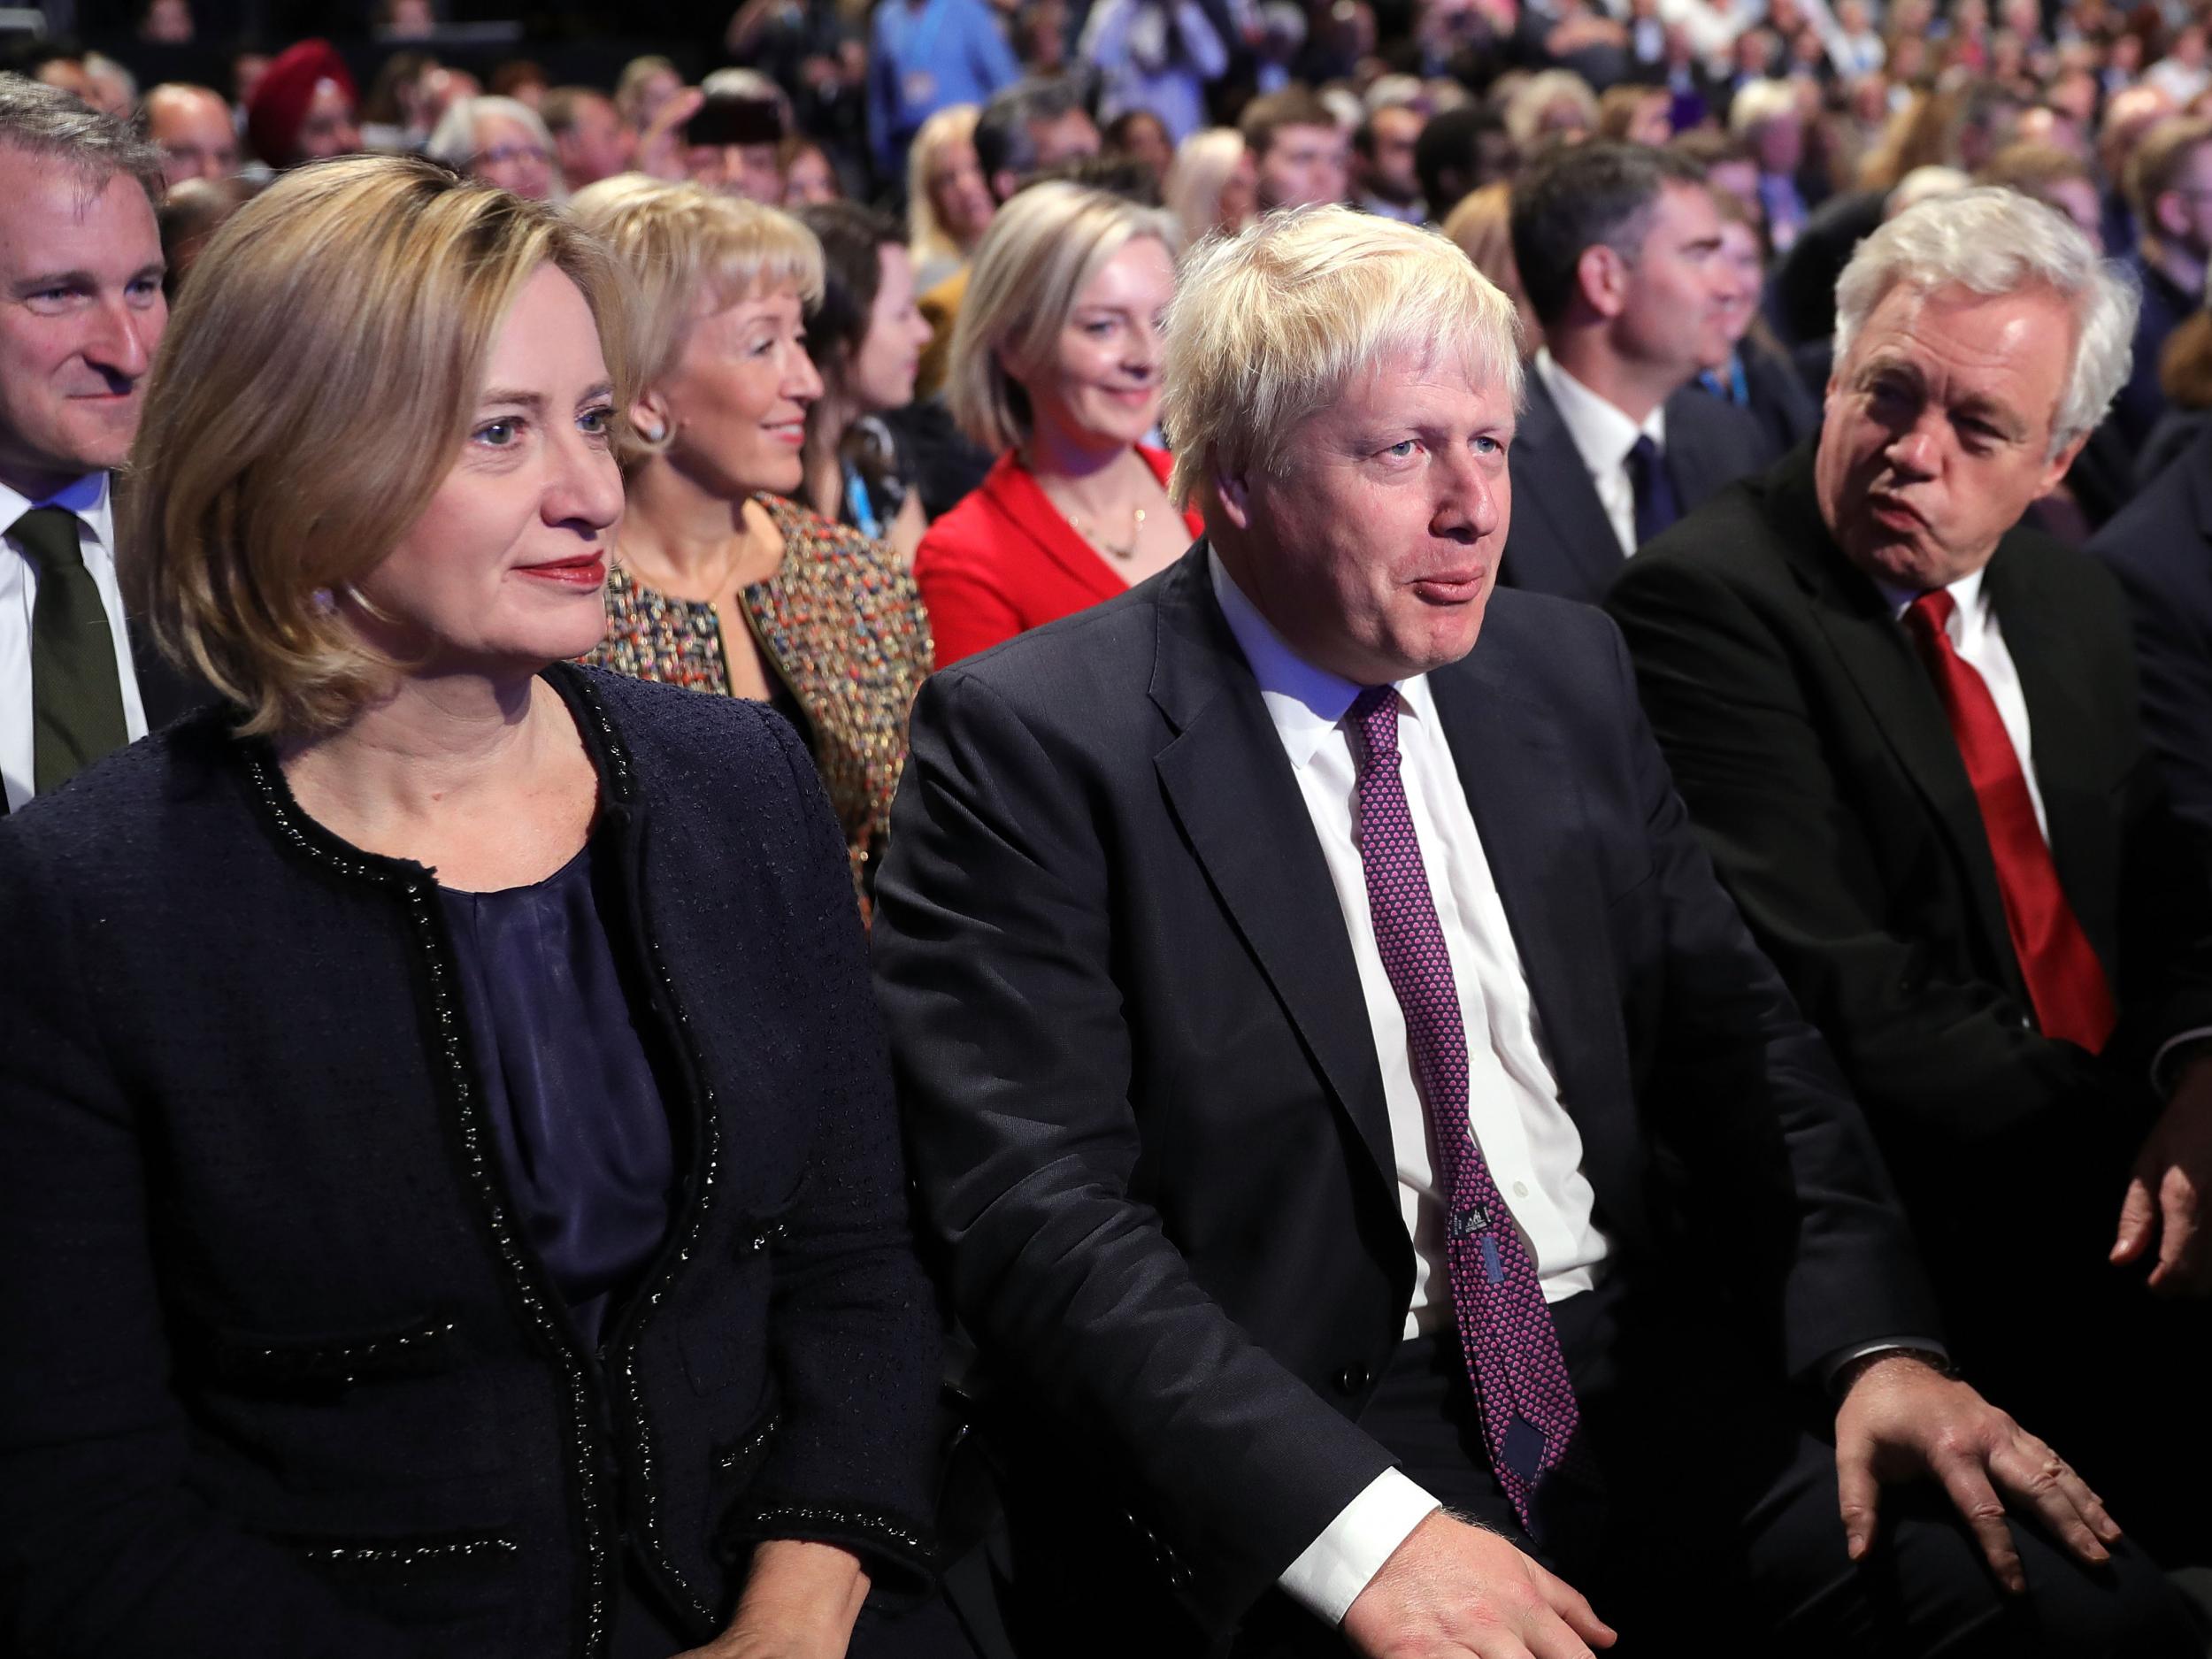 Rudd, Johnson and Davis are all tipped to be future leaders of the Tories